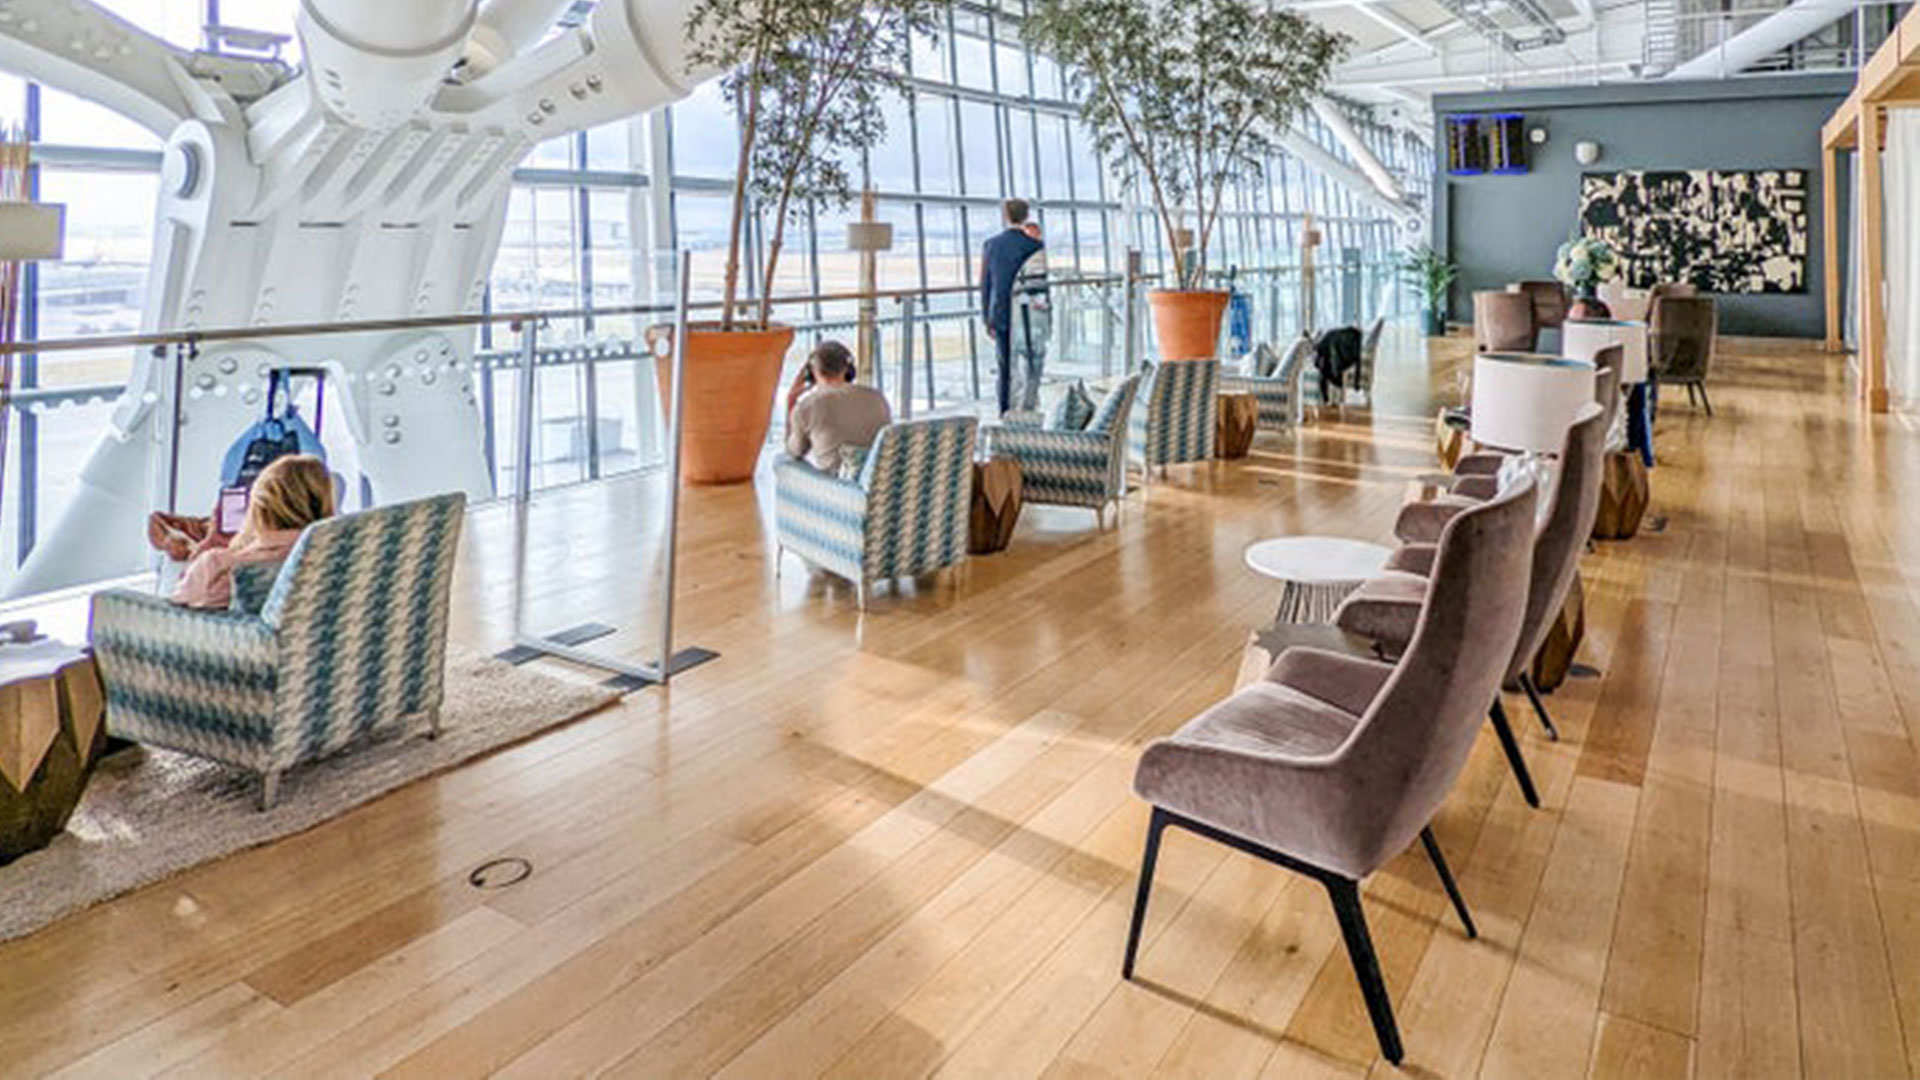 What is the best airport lounge? It has champagne worth £175 & lets guests skip the security & check-in queues